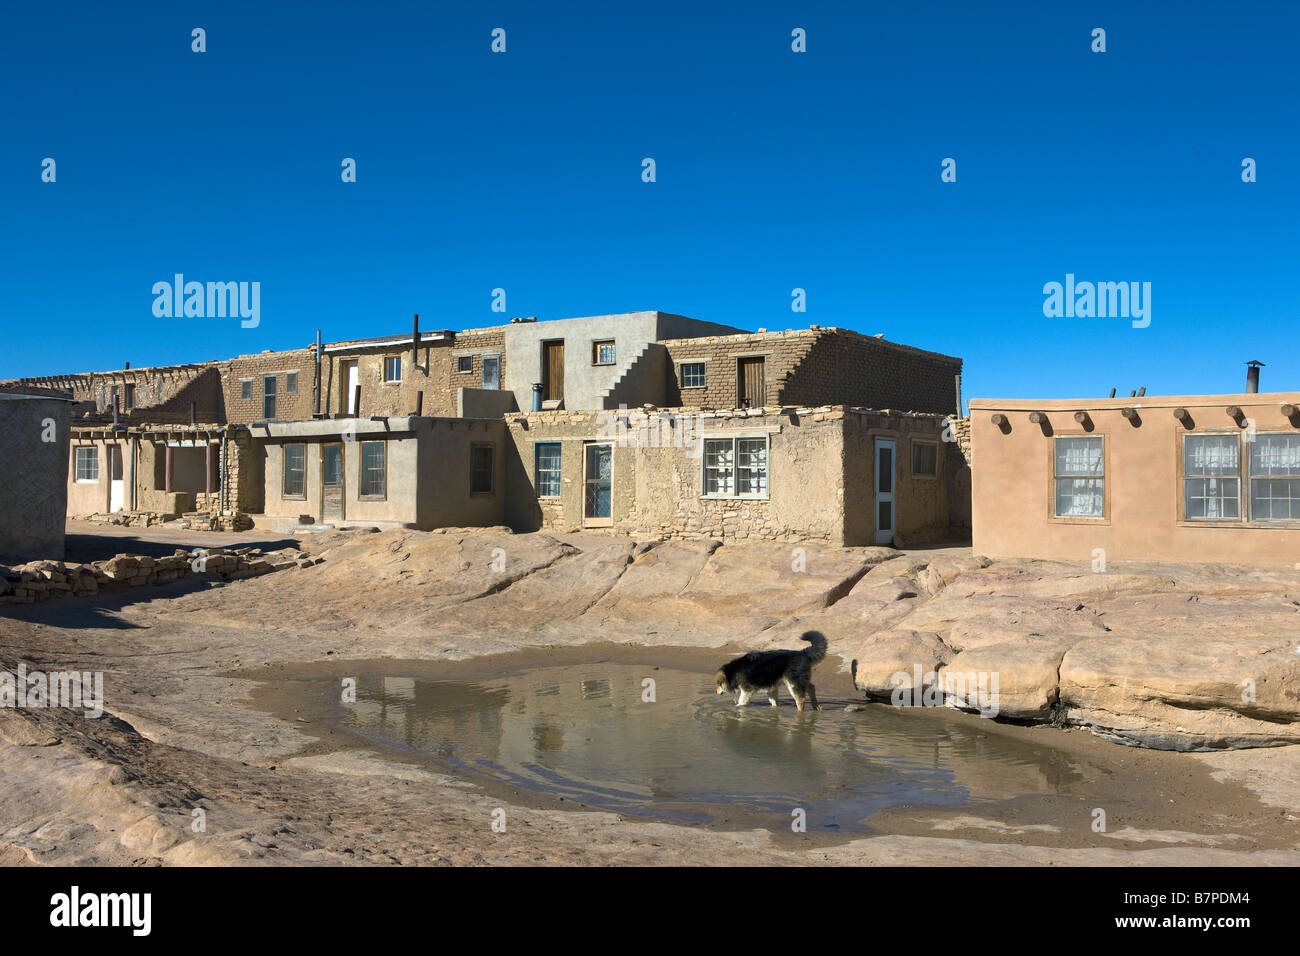 Acoma Pueblo, a mountaintop American Indian dwelling in New Mexico, USA Stock Photo